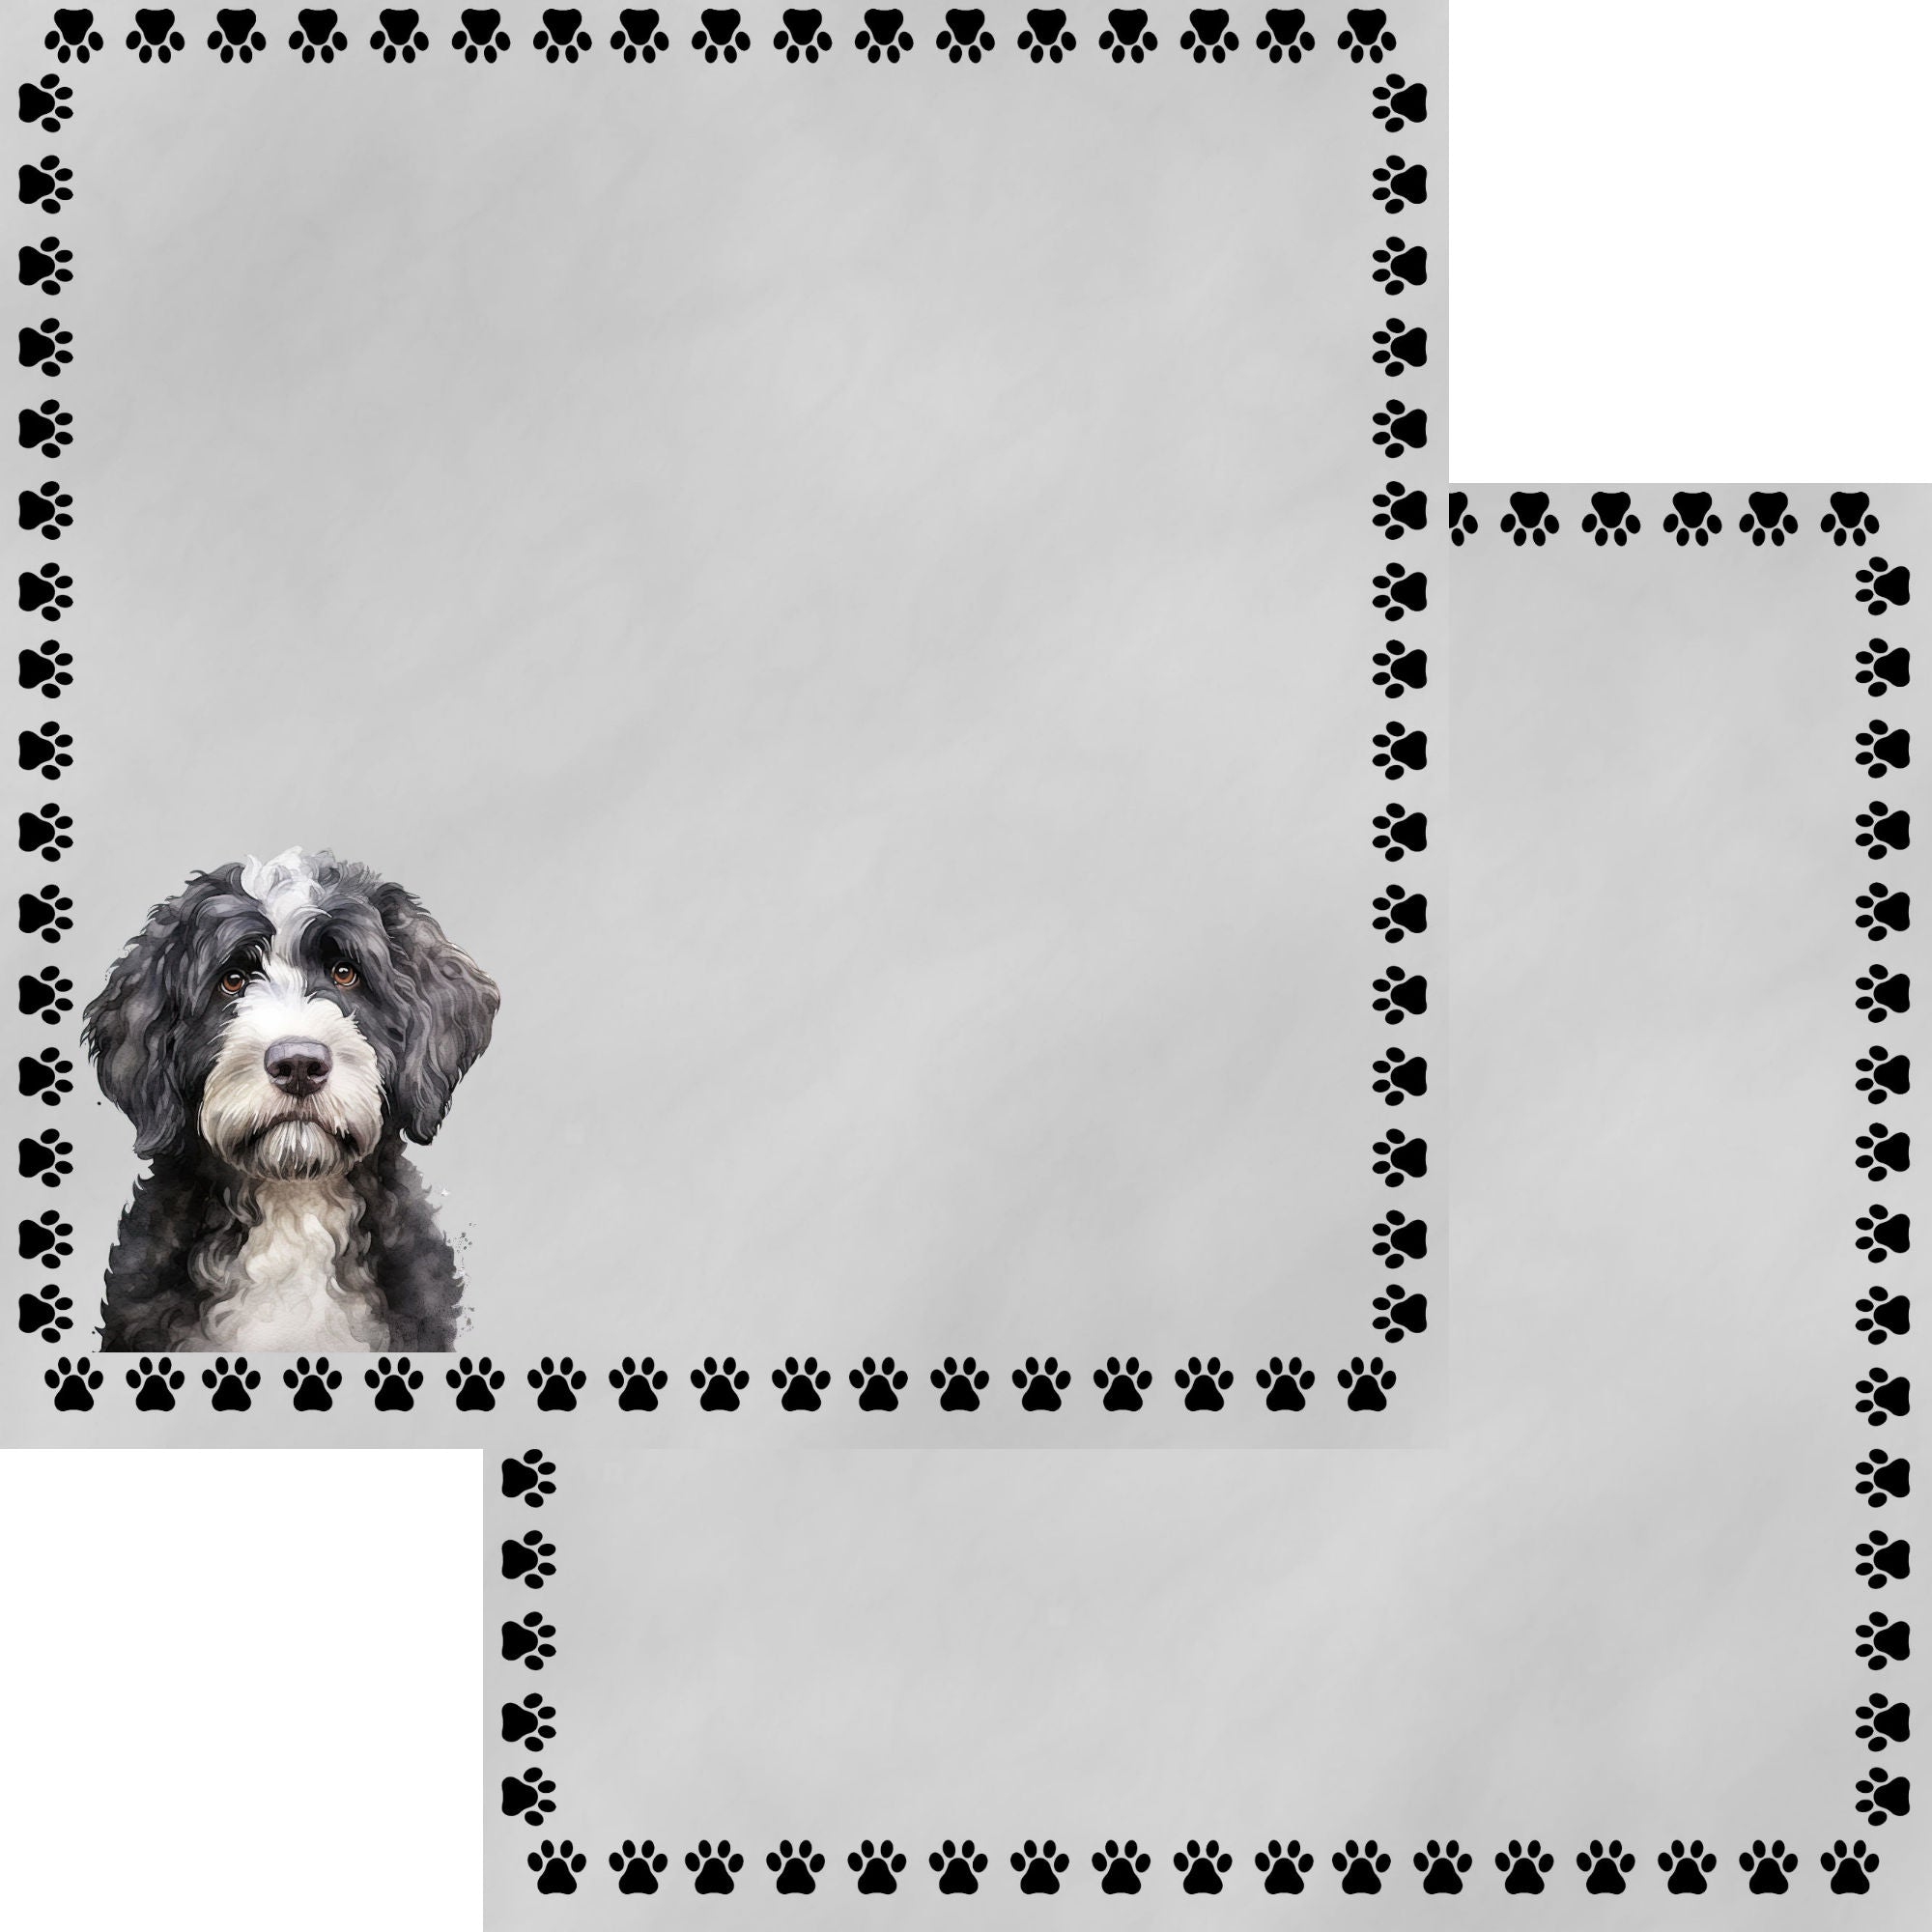 Dog Breeds Collection Bernedoodle 12 x 12 Double-Sided Scrapbook Paper by SSC Designs